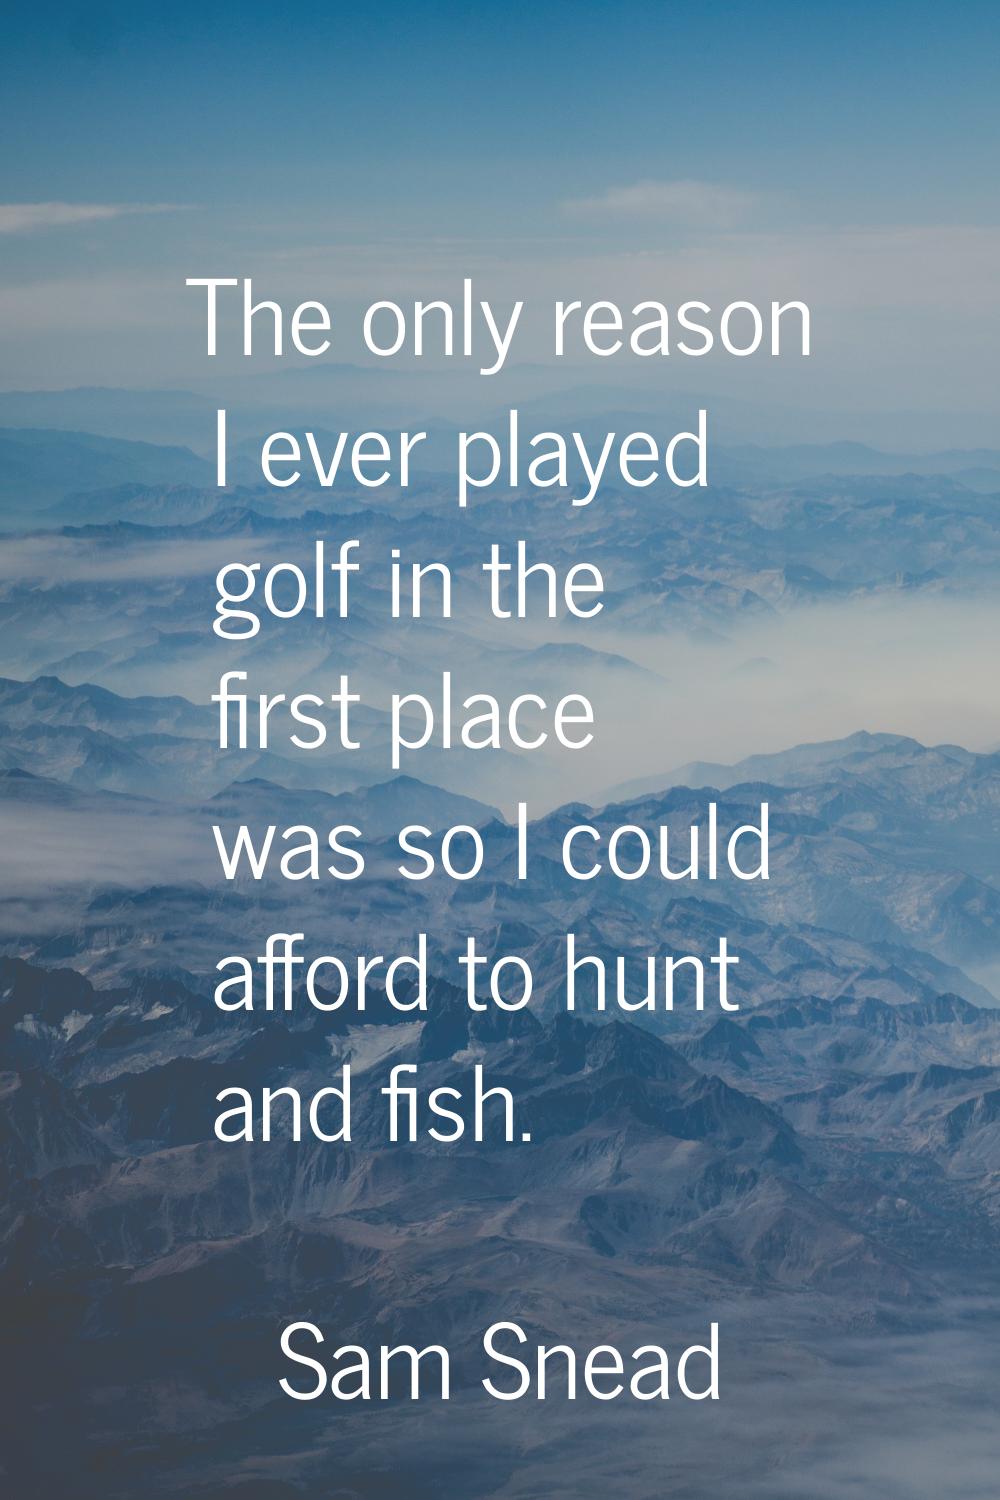 The only reason I ever played golf in the first place was so I could afford to hunt and fish.